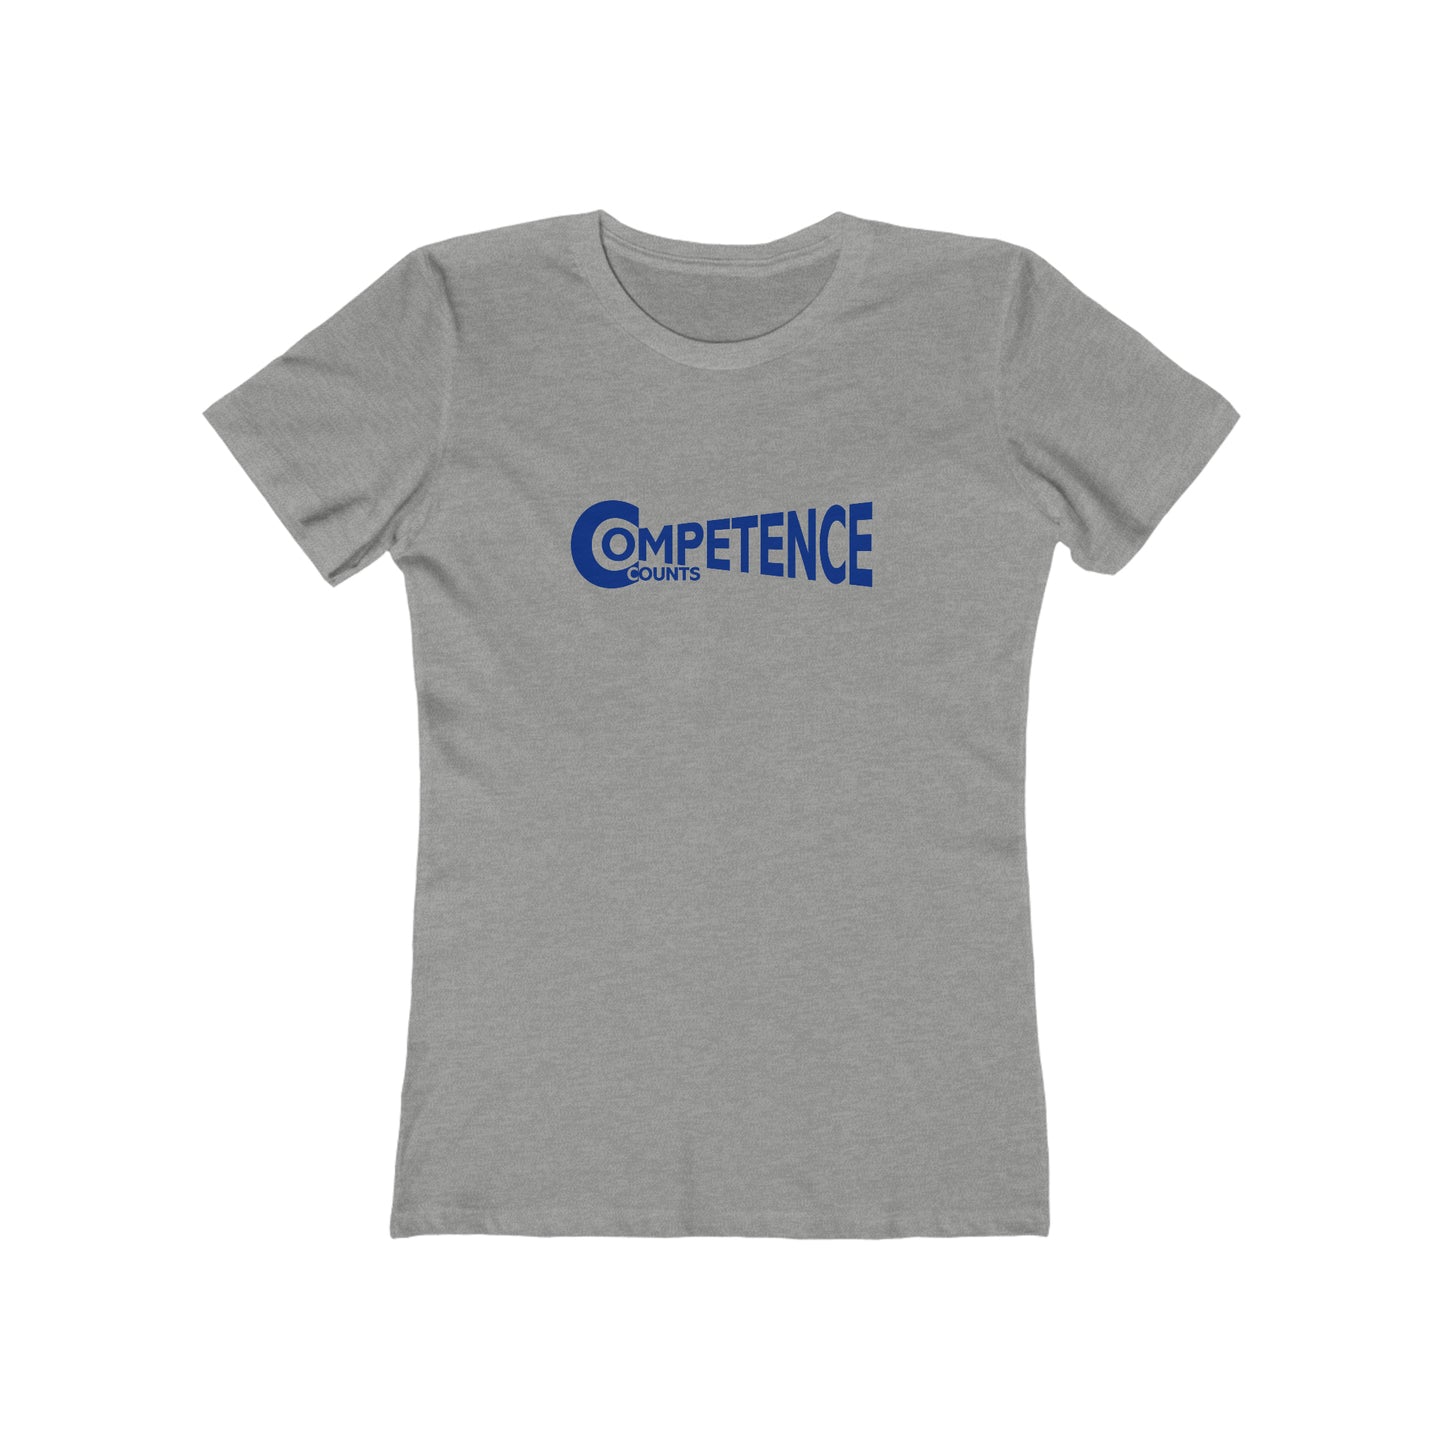 Competence Counts - Women's T-Shirt